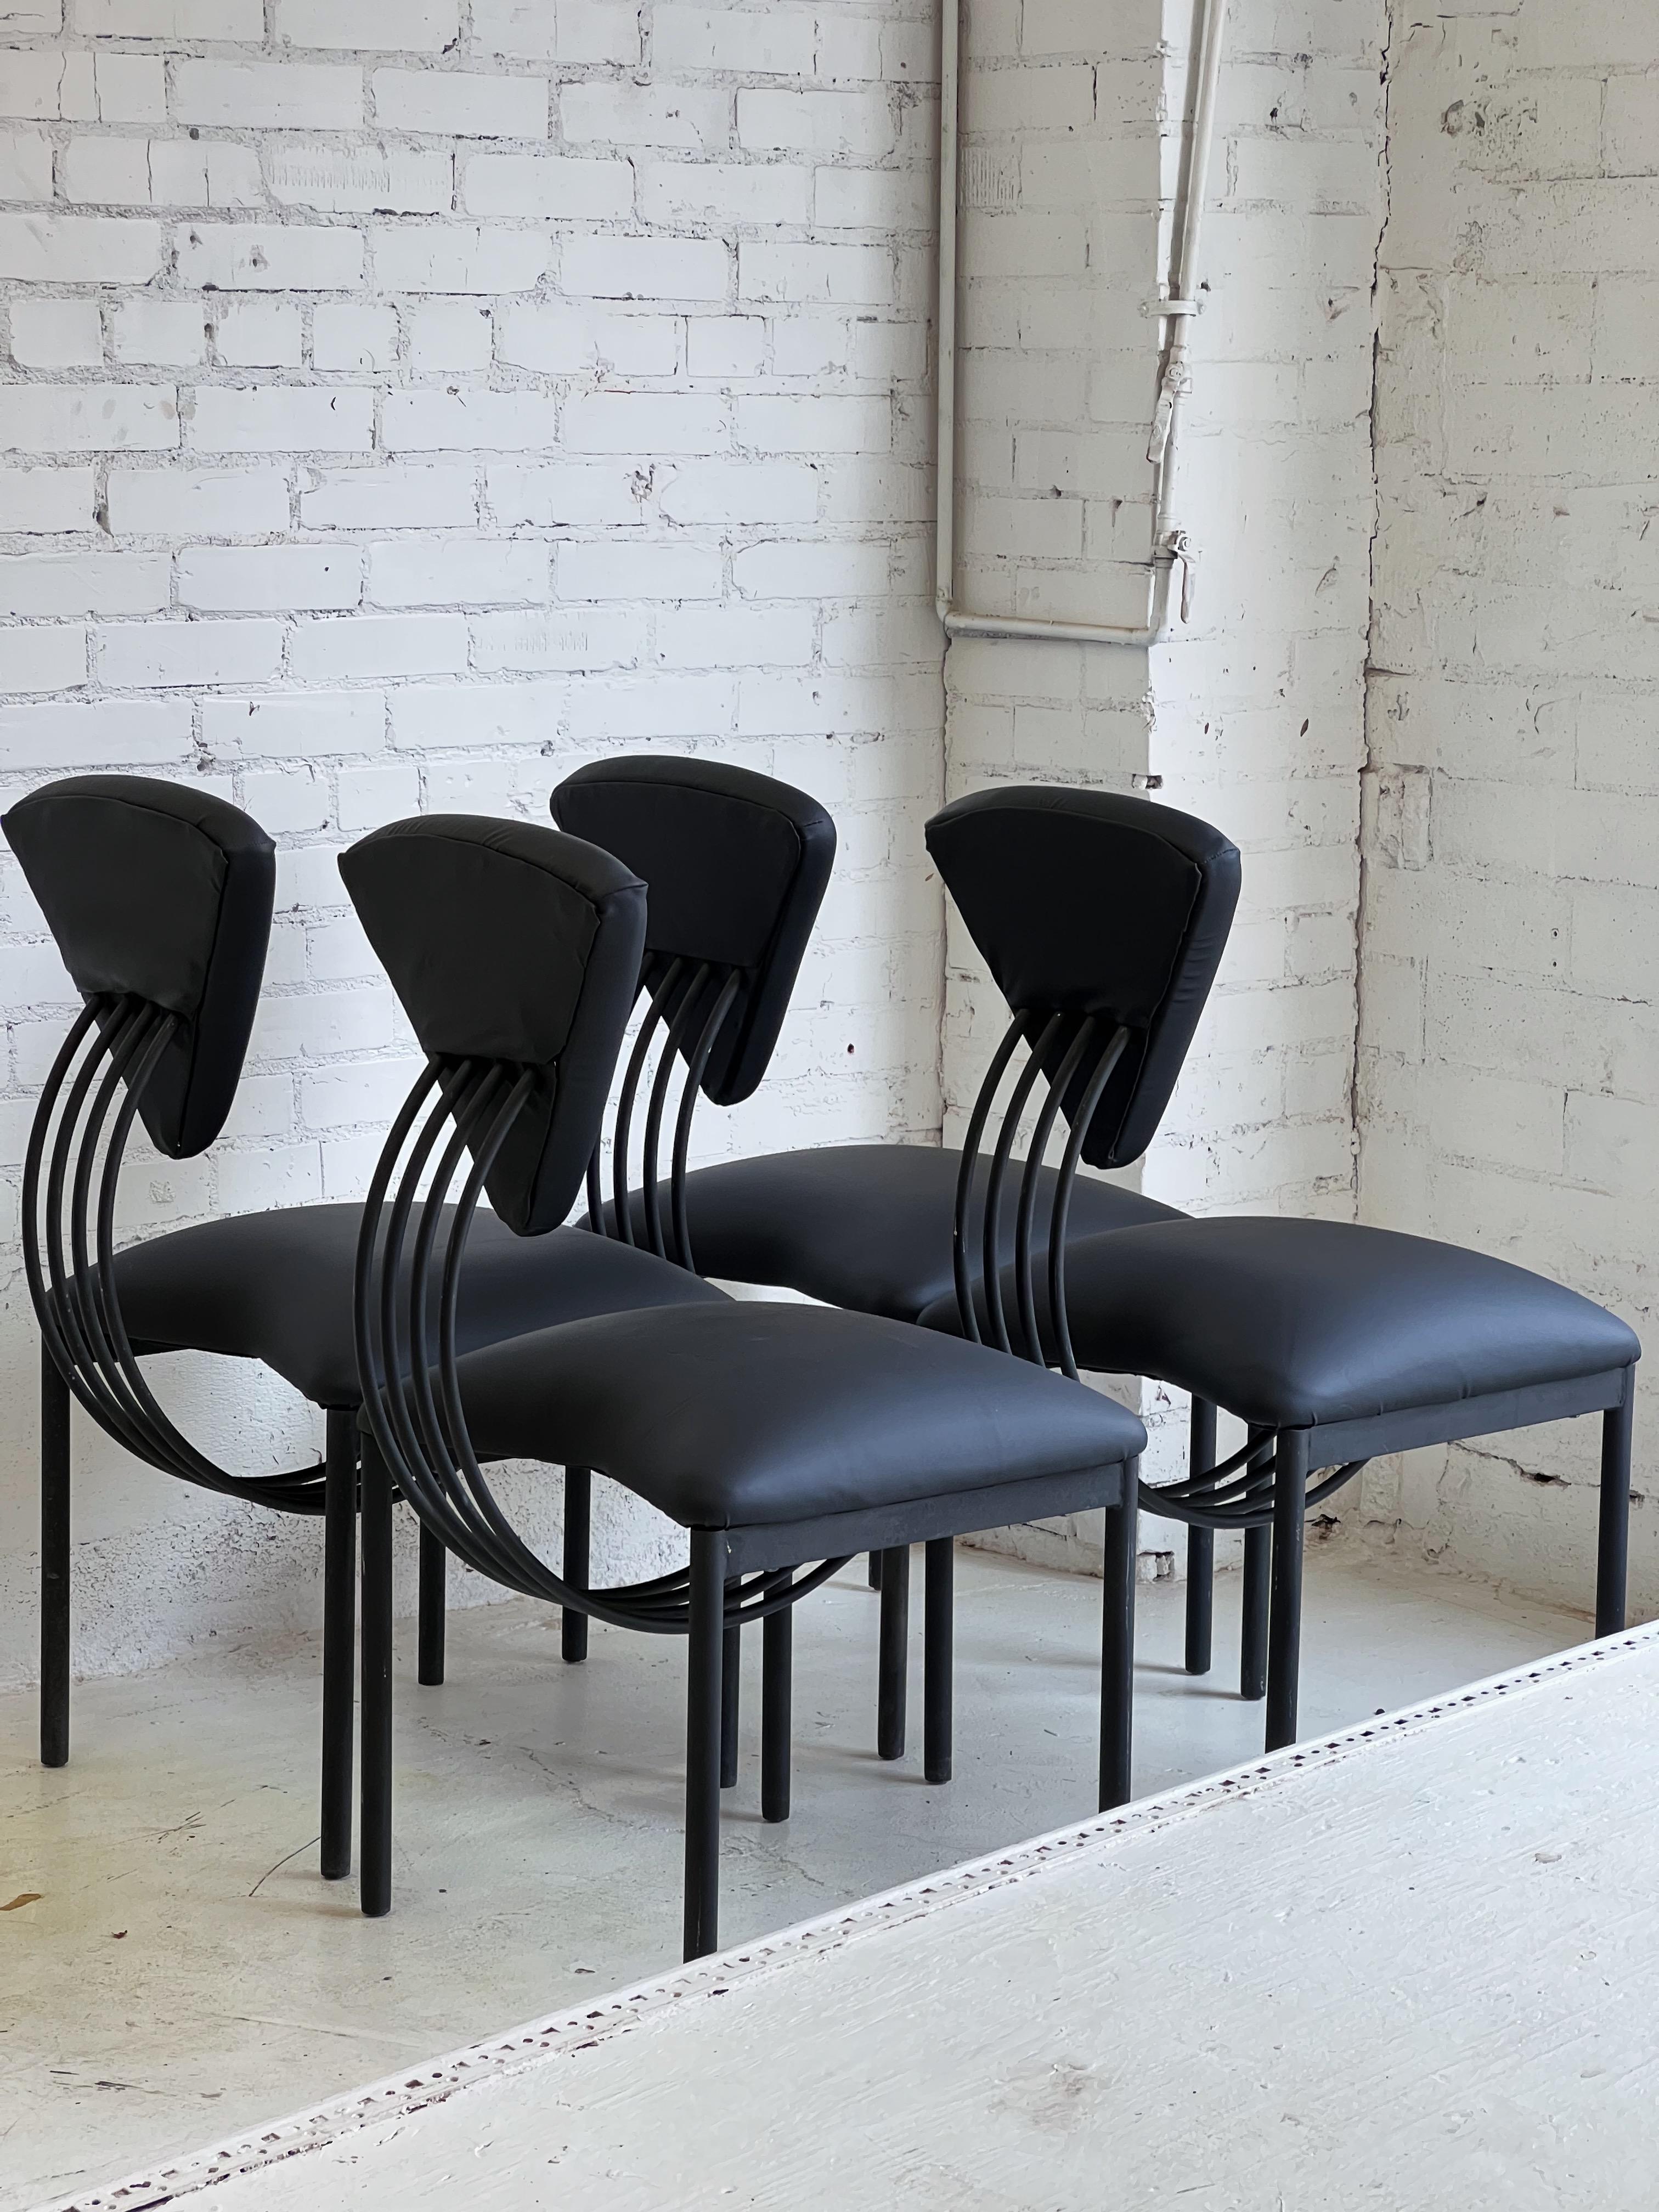 Memphis style chairs in the style of Ettore Sottsass in monochrome black.

Unmistakable silhouette with very plush cushioning; offering the rare double threat of both striking design and comfort.

Chairs are quality built and heavy. Frames are